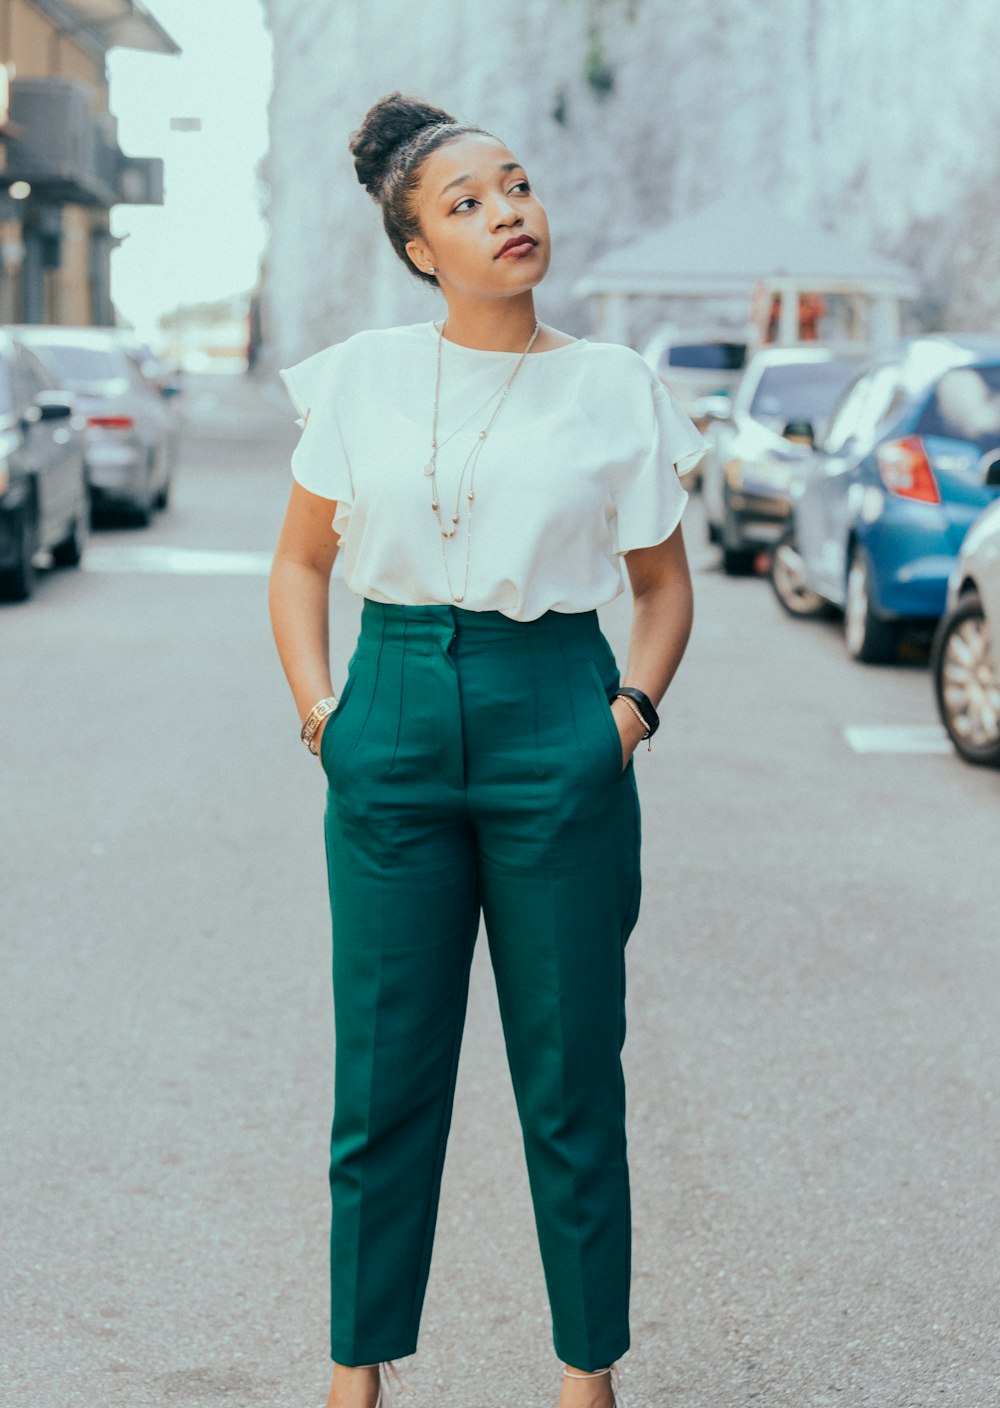 woman in white shirt and black pants standing on road during daytime photo  – Free The bahamas Image on Unsplash